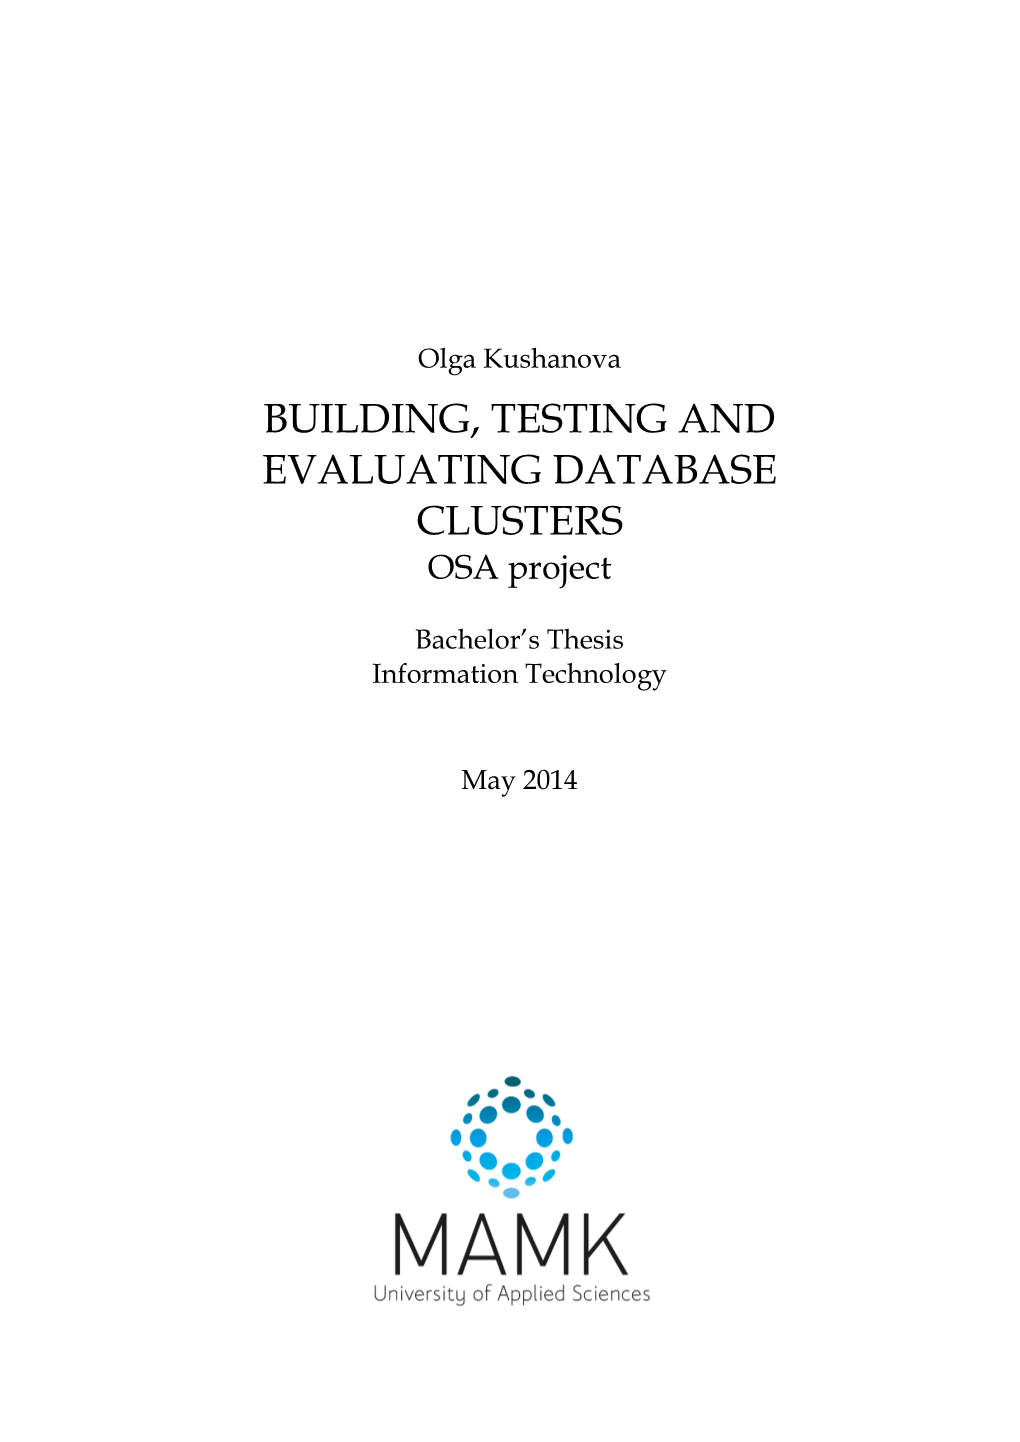 BUILDING, TESTING and EVALUATING DATABASE CLUSTERS OSA Project